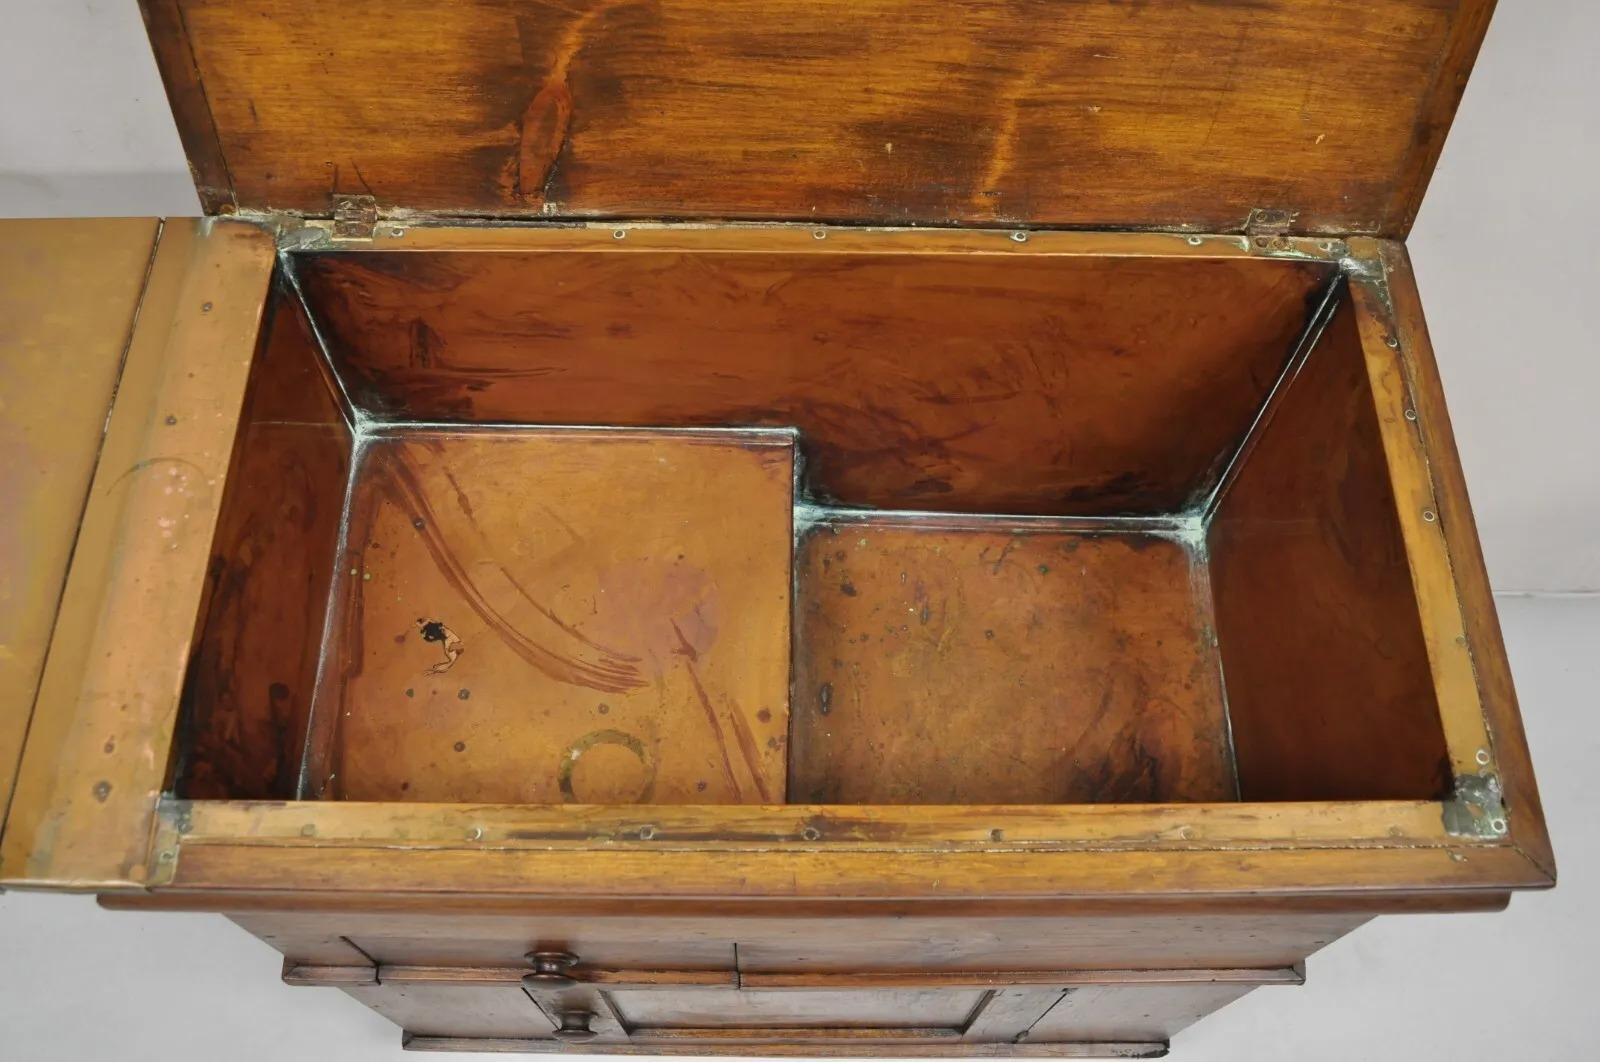 Antique Pine Wood Lift Top Copper Lined Dry Sink with Copper Drop Side Surface 1